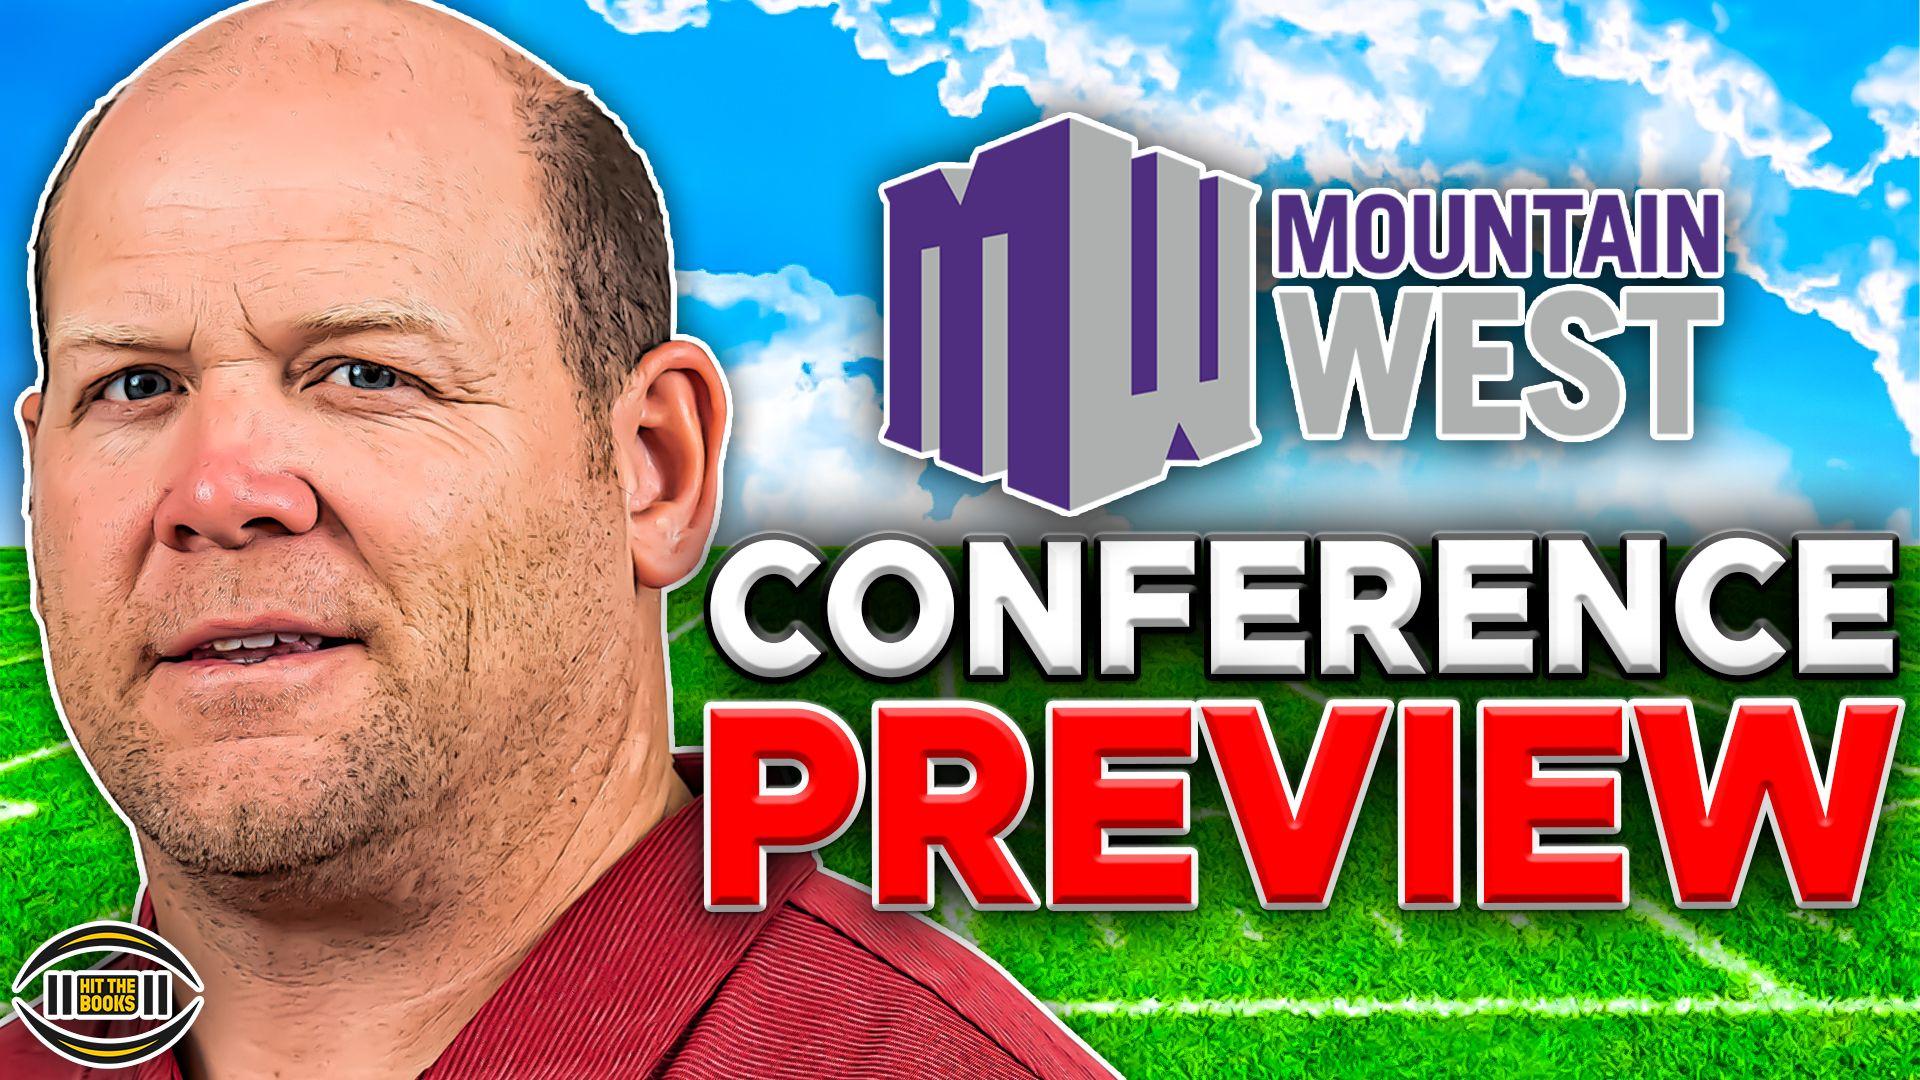 mountain west Preview copy.jpg